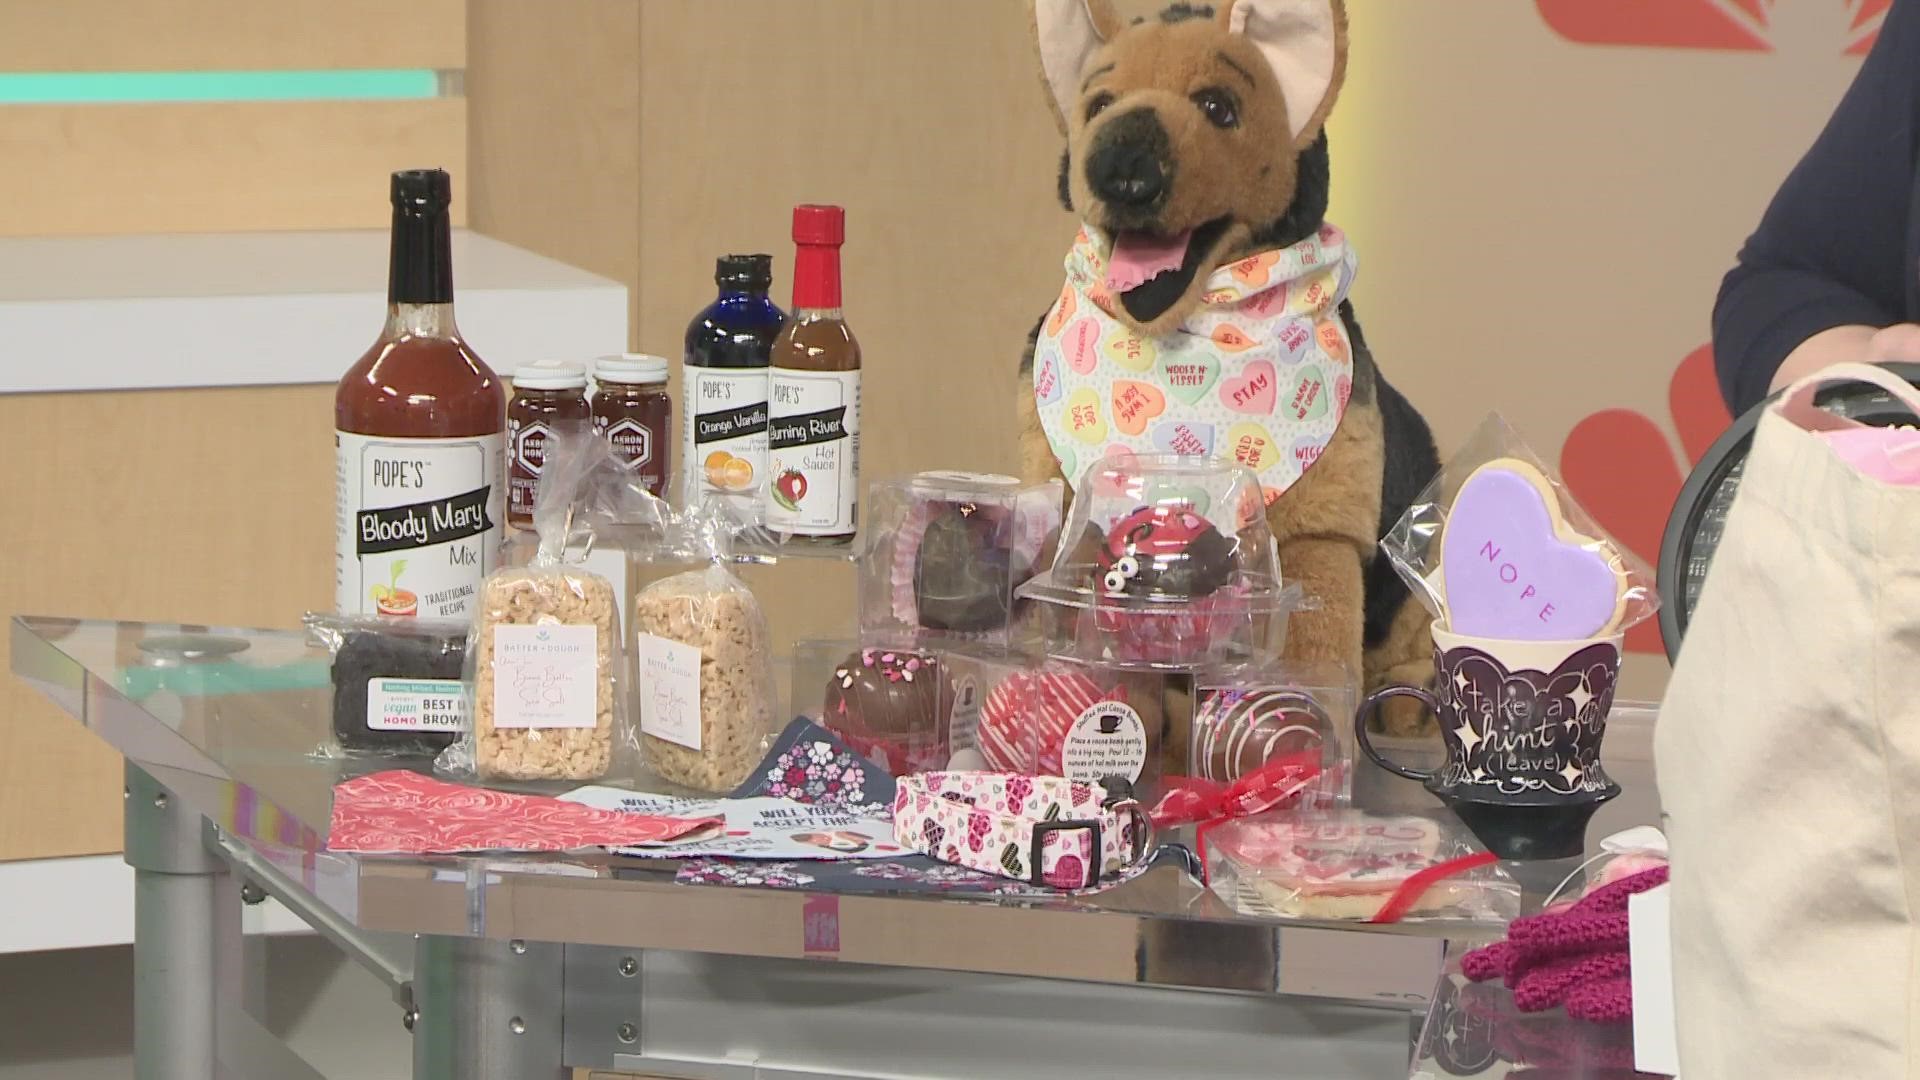 If you are looking for a Valentine's Day gift, Cleveland Bazaar is hosting a pop-up shop.